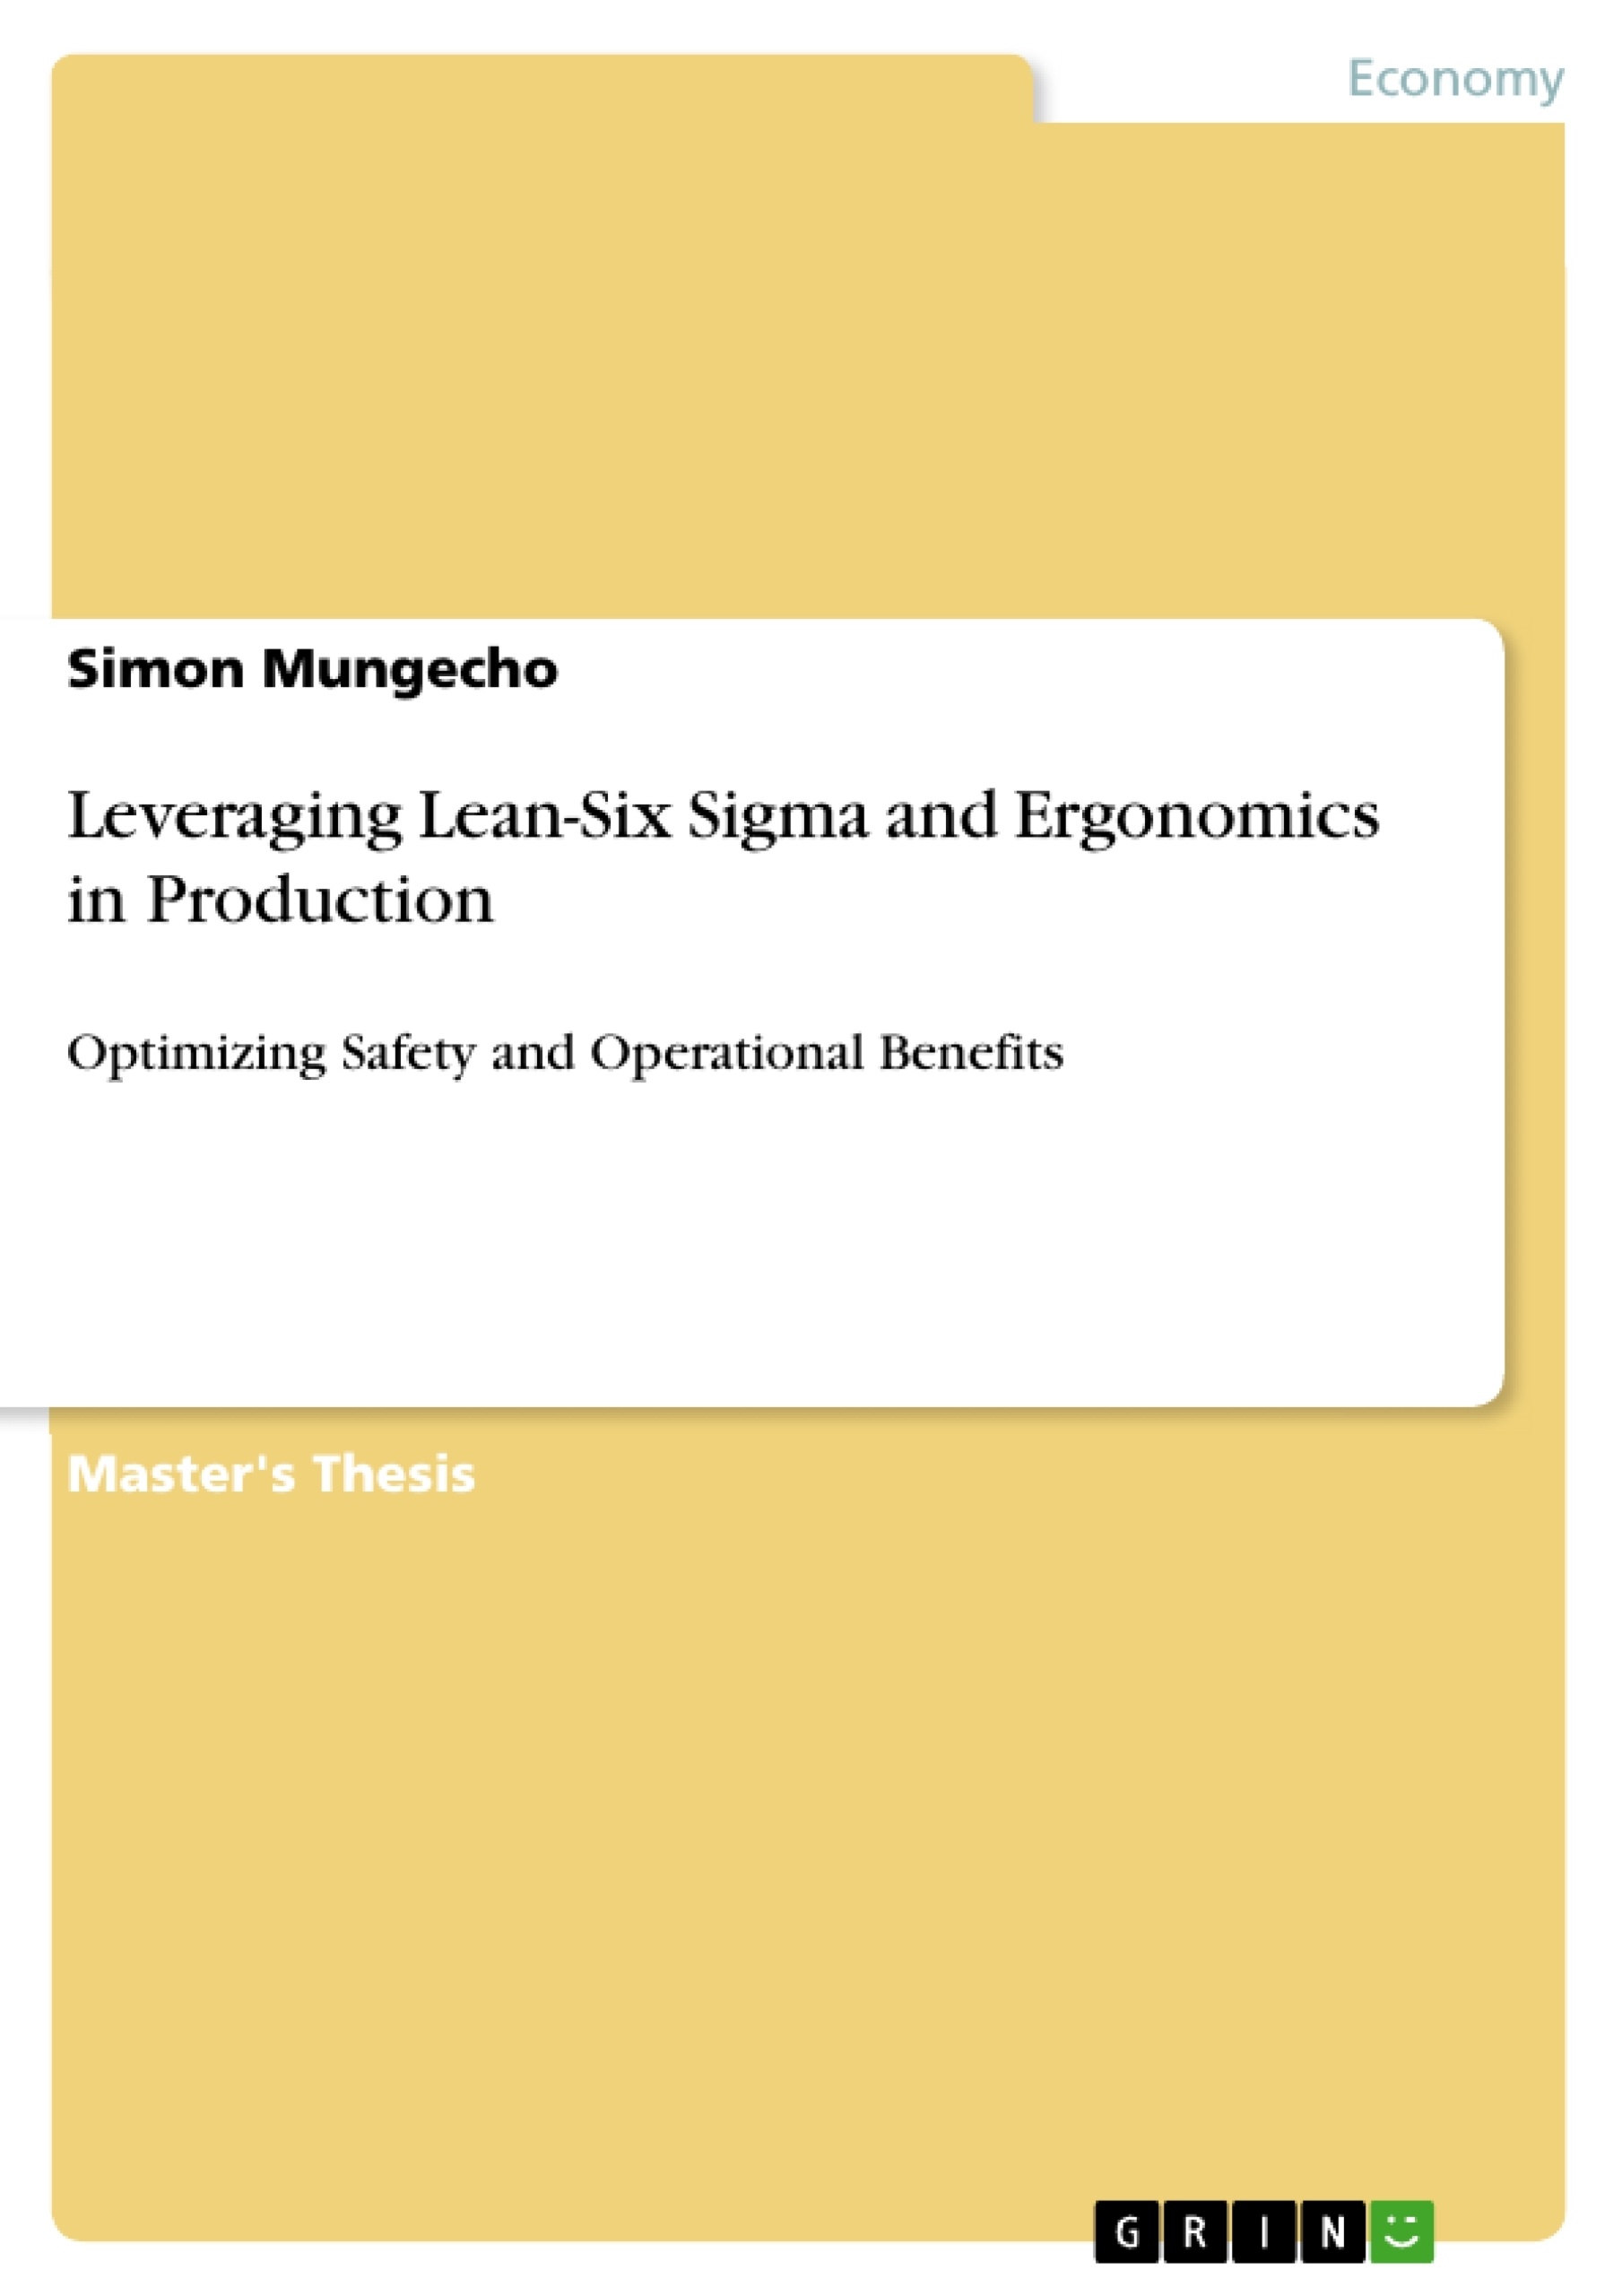 Leveraging　Production　in　GRIN　Lean-Six　and　Sigma　Ergonomics